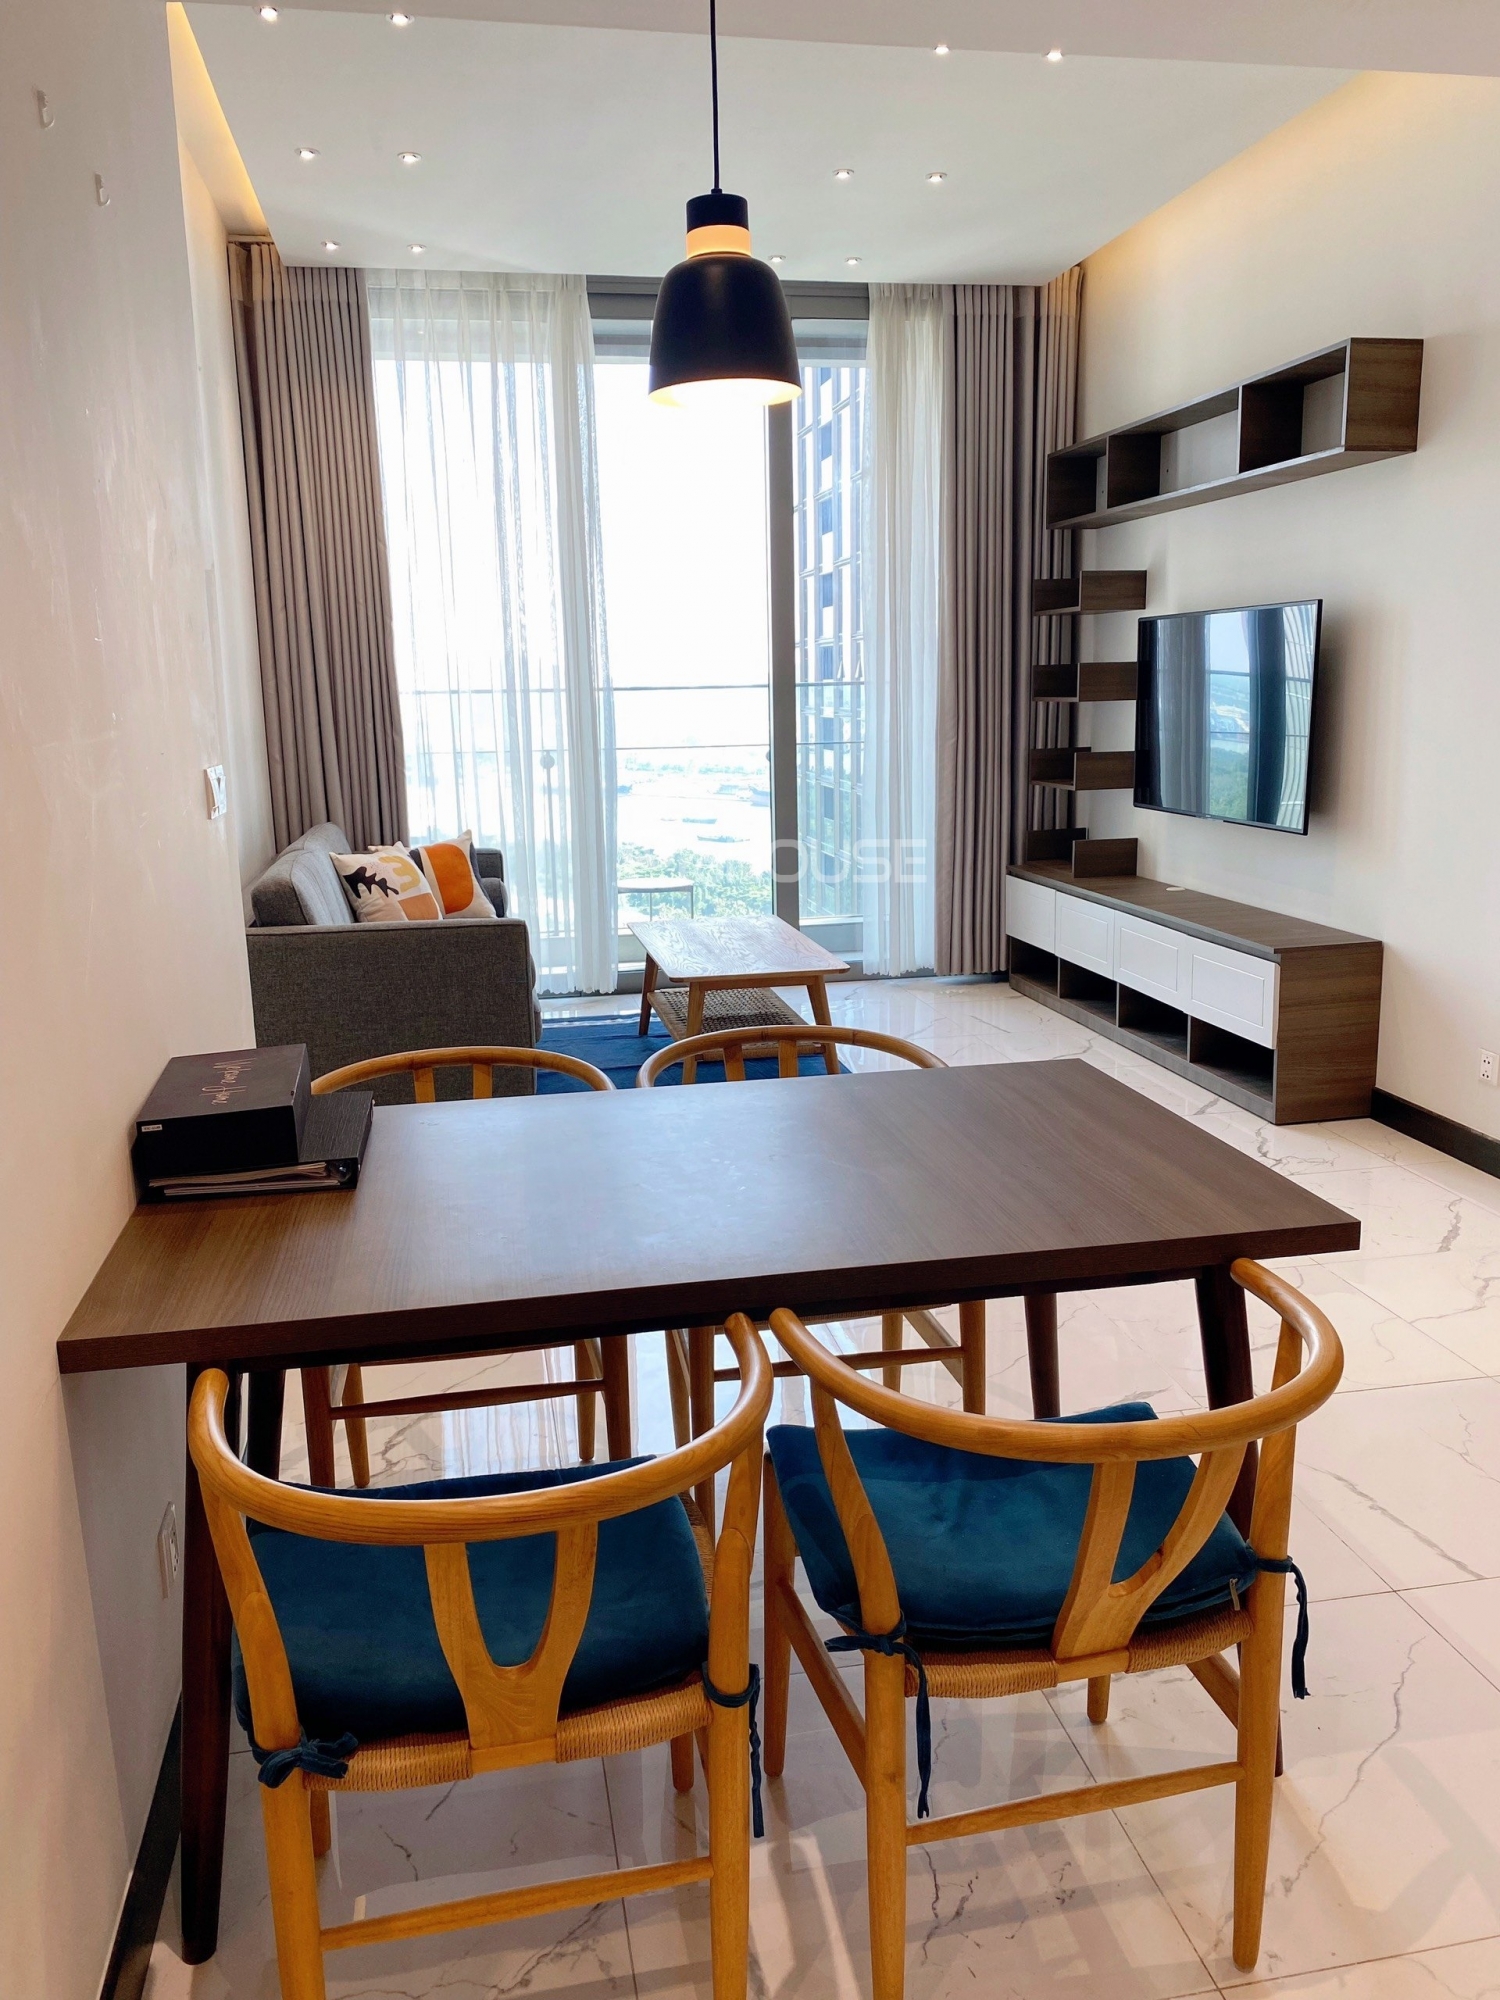 1 bedroom apartment for rent in Empire City with modern furniture